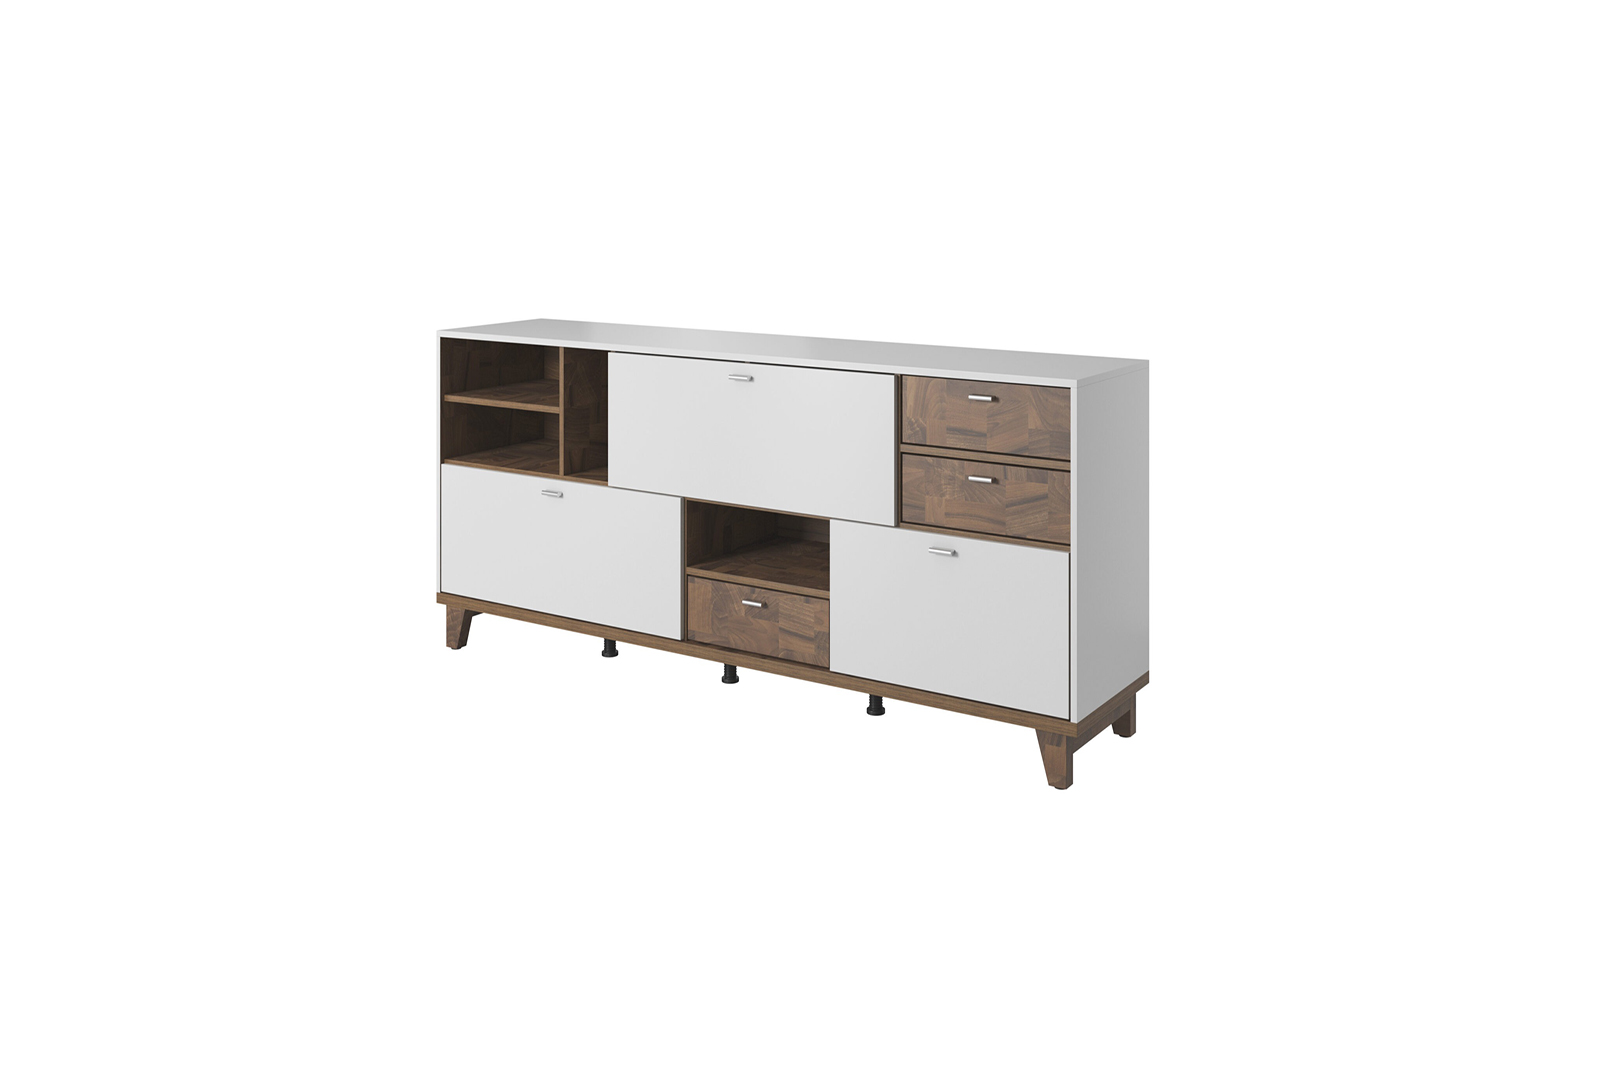 MOVE CHEST OF DRAWERS TYPE 28